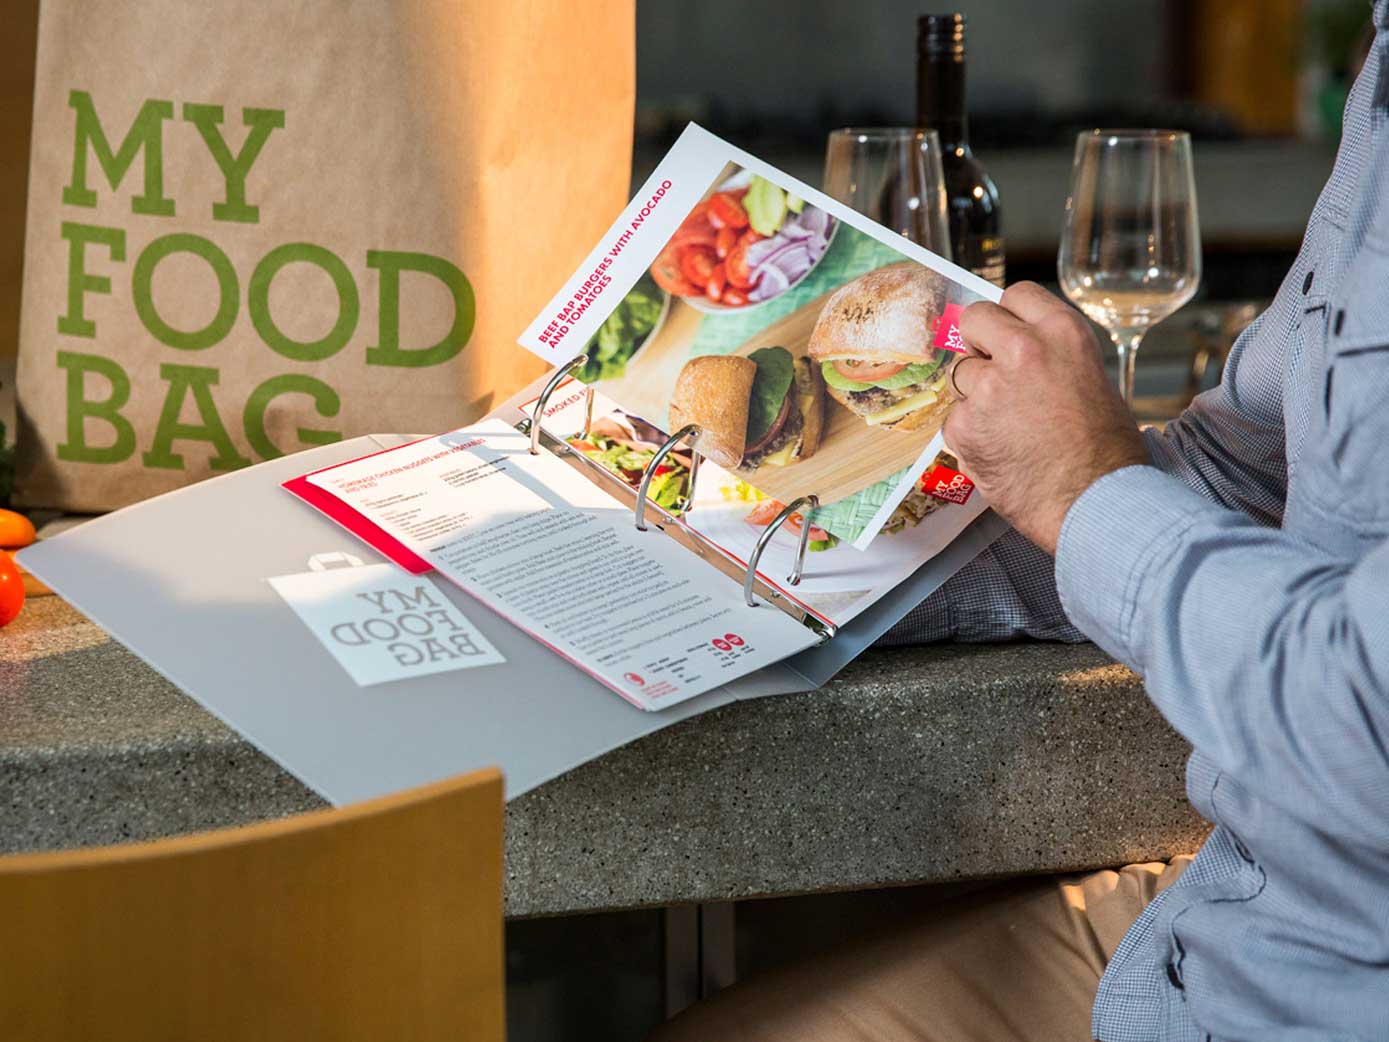 A person reading a My Food Bag booklet